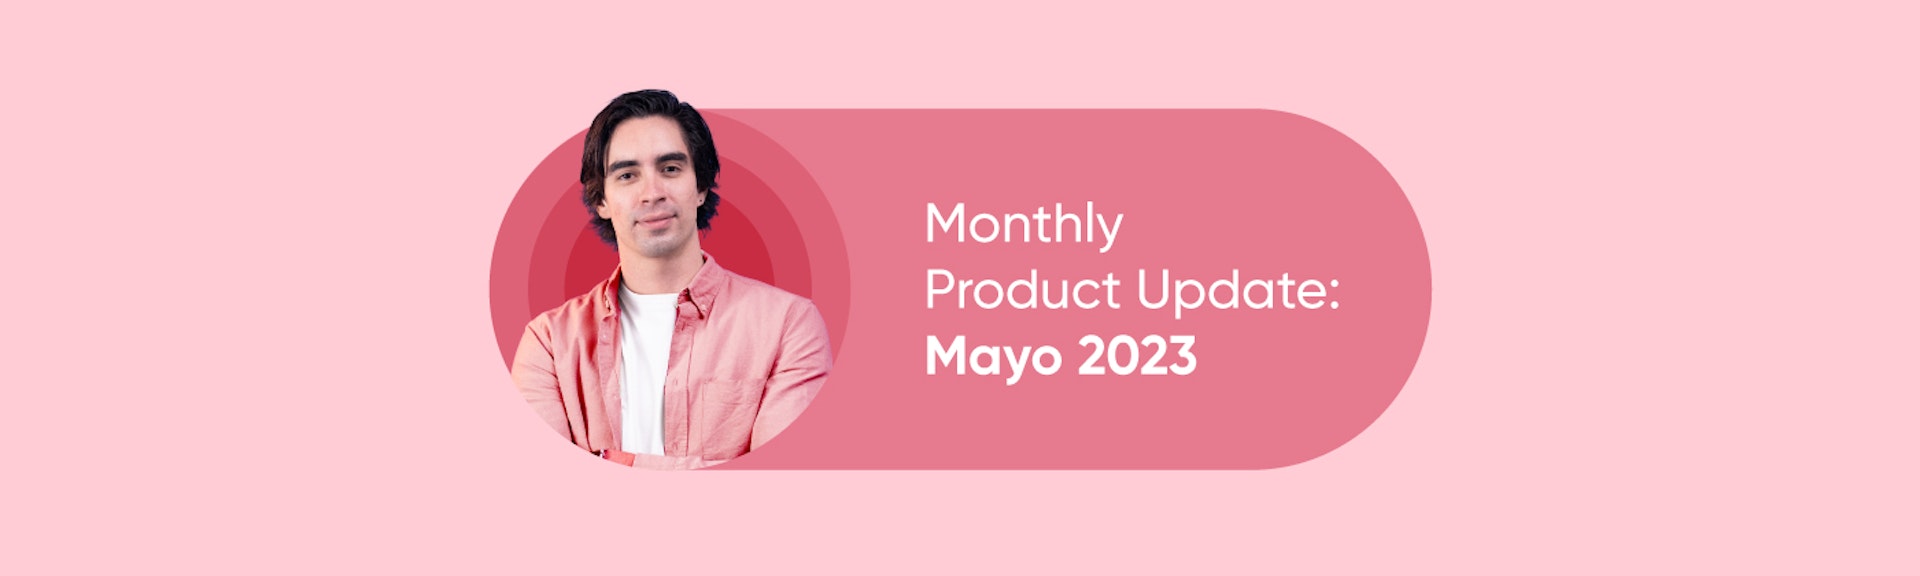 Monthly Product Update: Mayo 2023